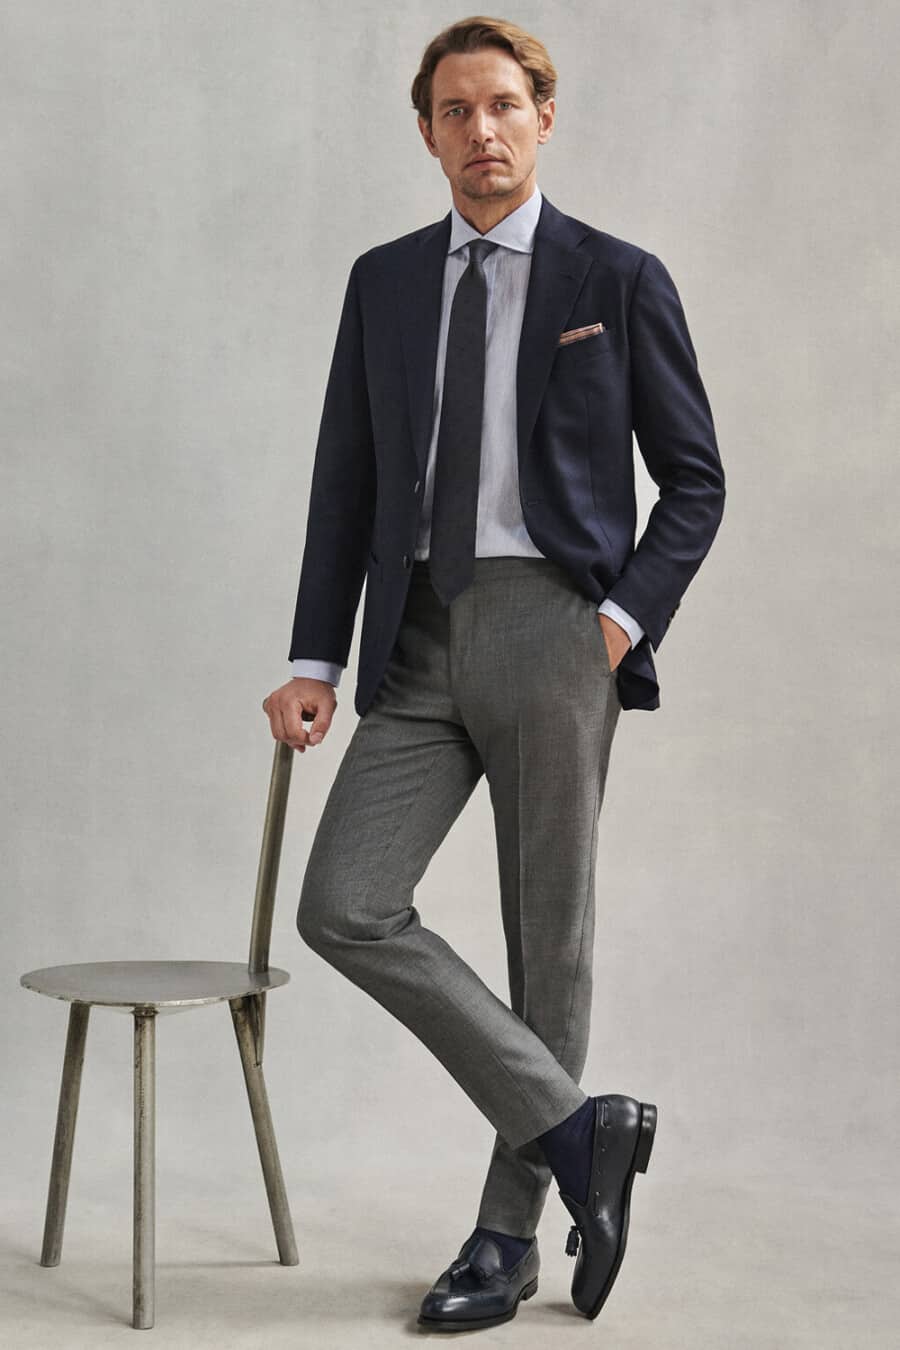 Men's grey trousers, navy blazer, light blue shirt, navy tie and navy leather tassel loafers outfit